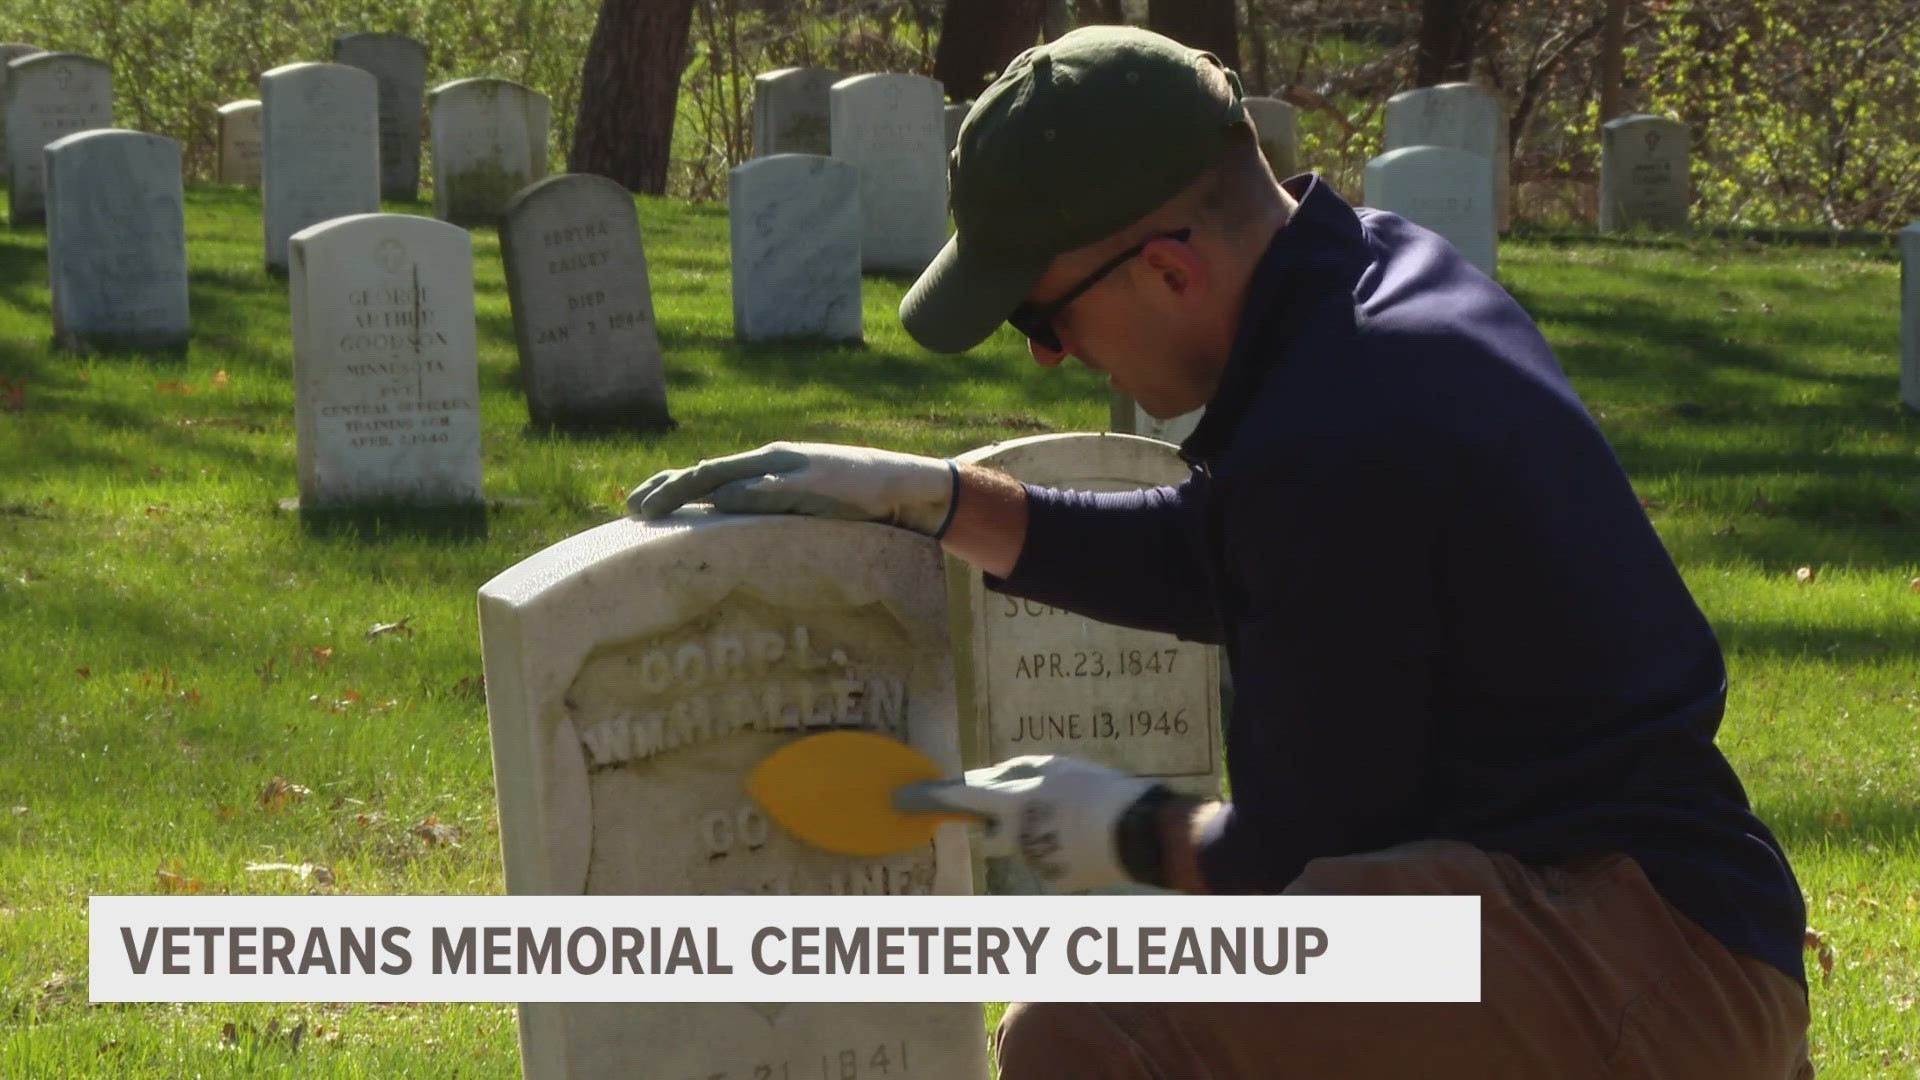 In honor of Earth Day, volunteers are working to cleanup the grounds and headstones at the Grand Rapids Home for Veterans Memorial Cemetery.